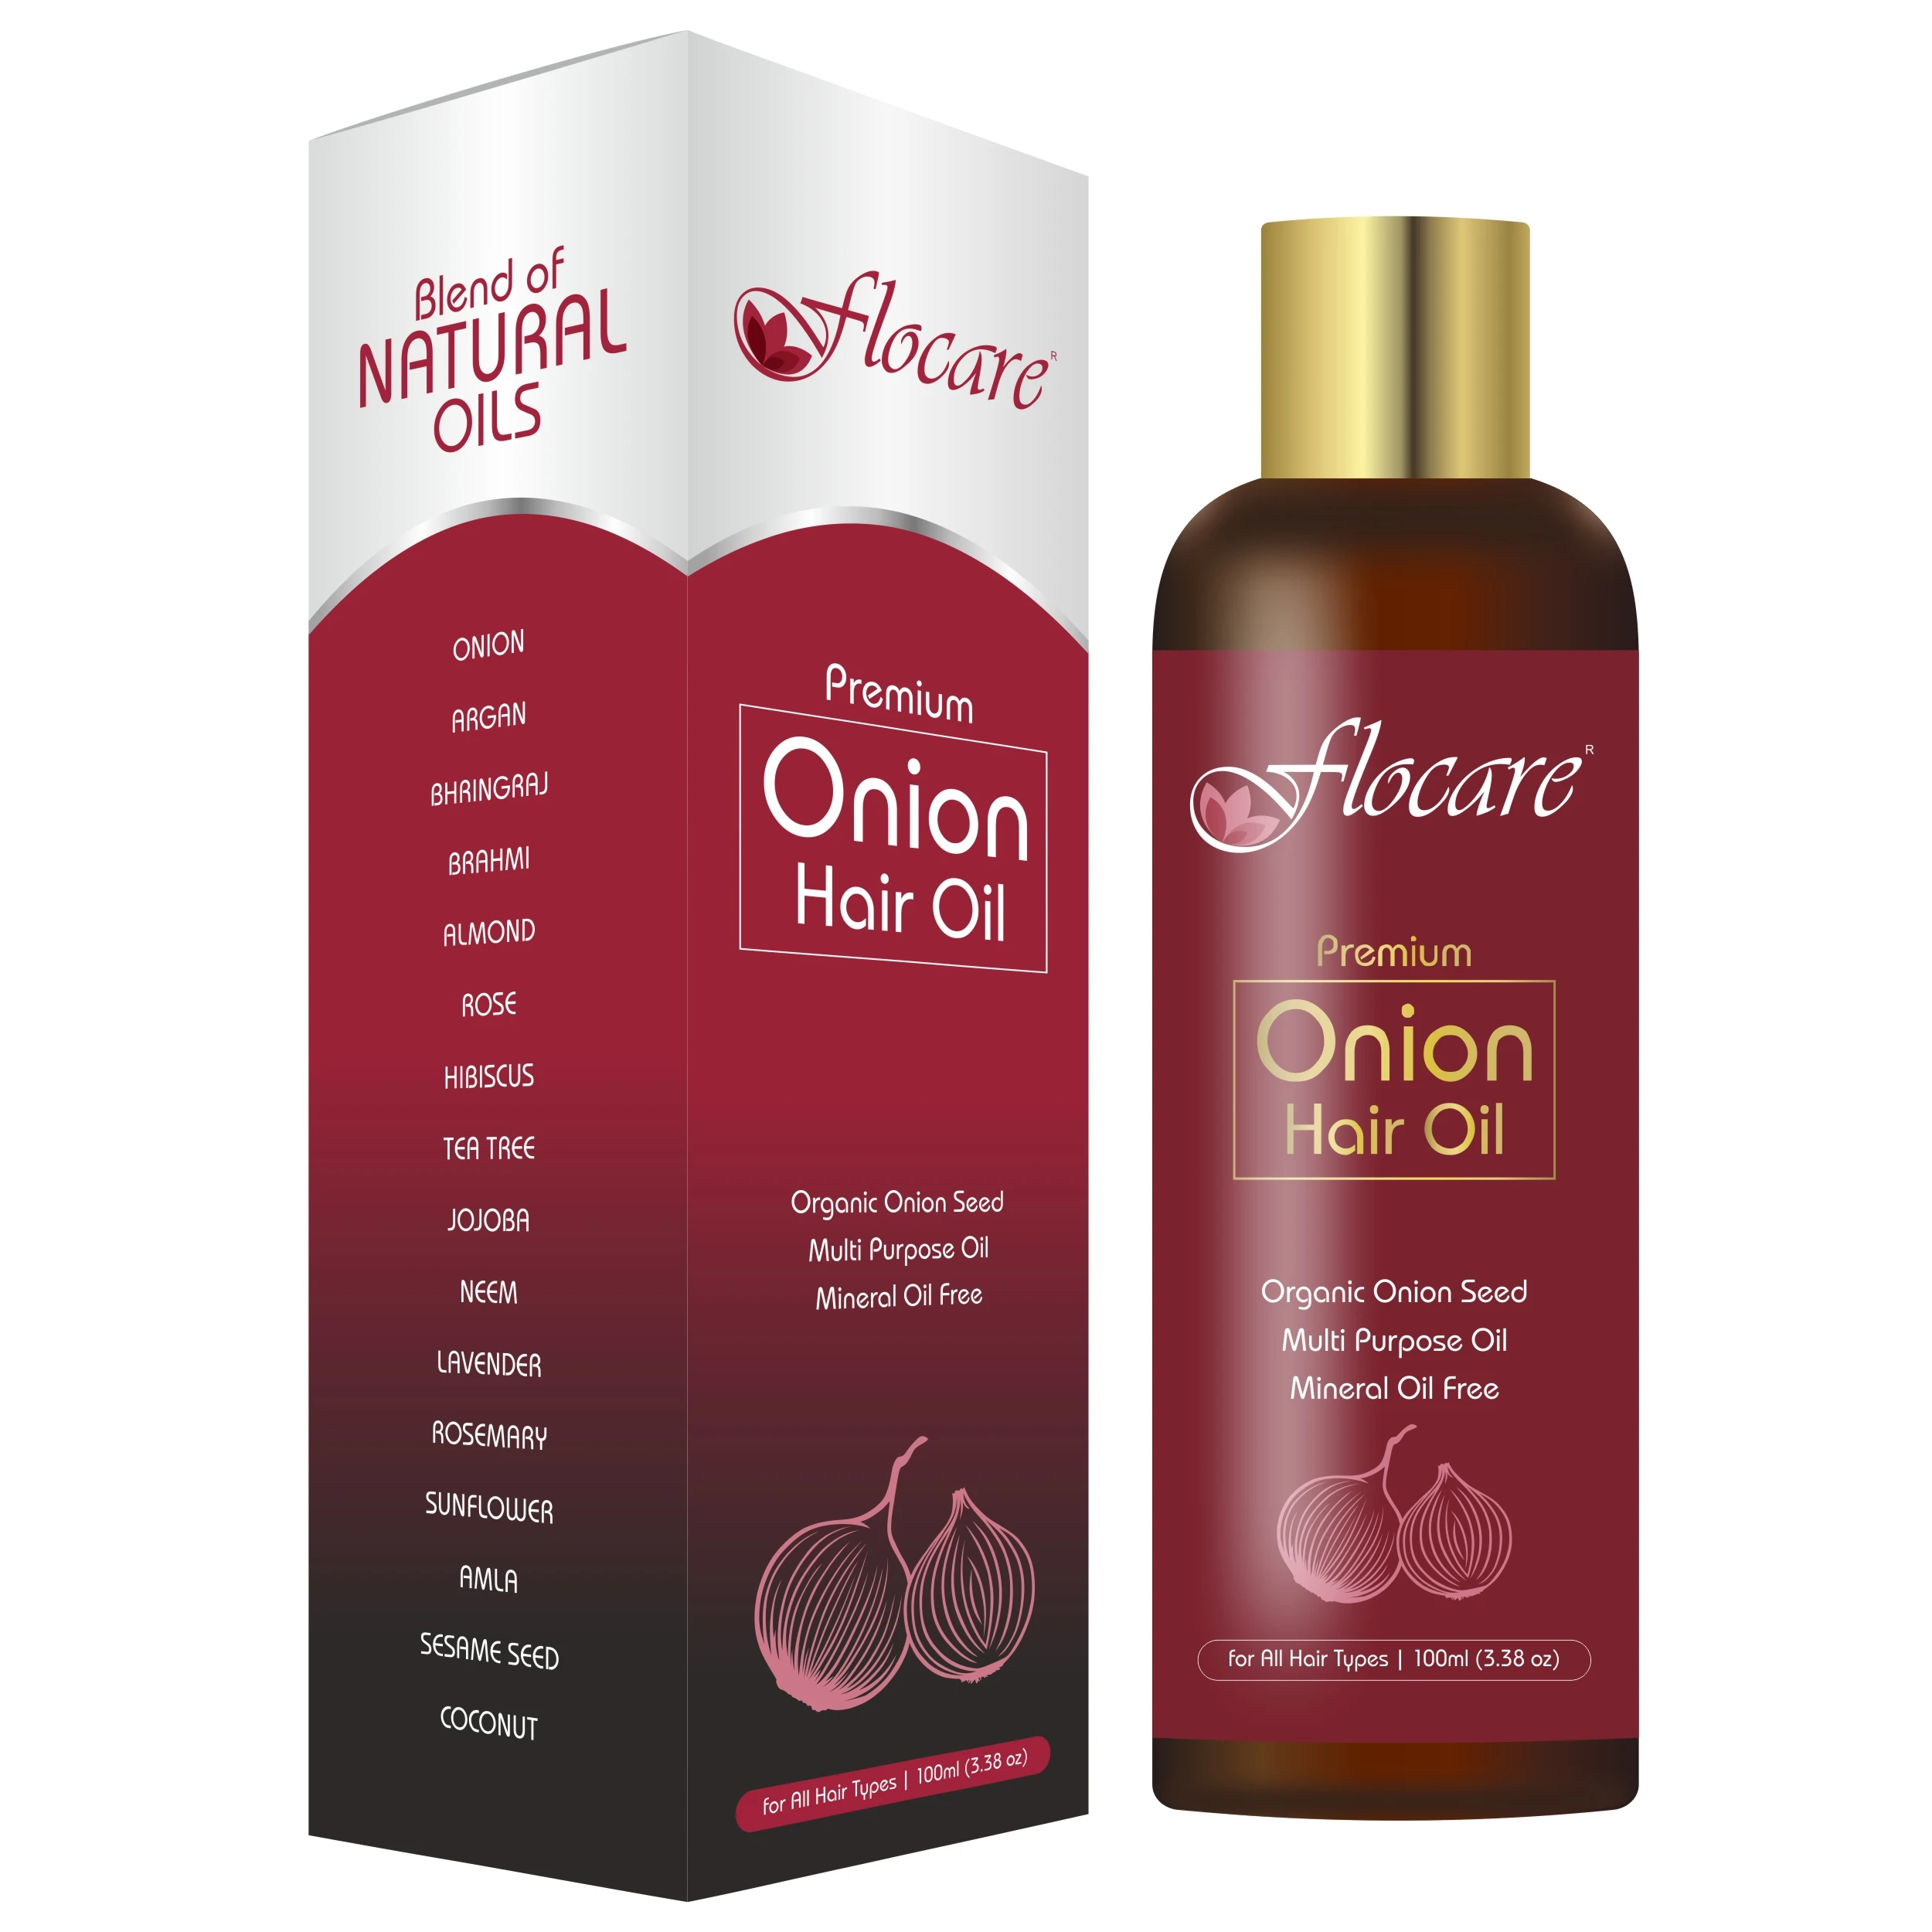 World Best Herbal Hair Regrowth Product Fast Hair Growth Oil Serum Buy Magic Hair Oil Fast Hair Growth Oil Serum Best Hair Oil Product On Alibaba Com